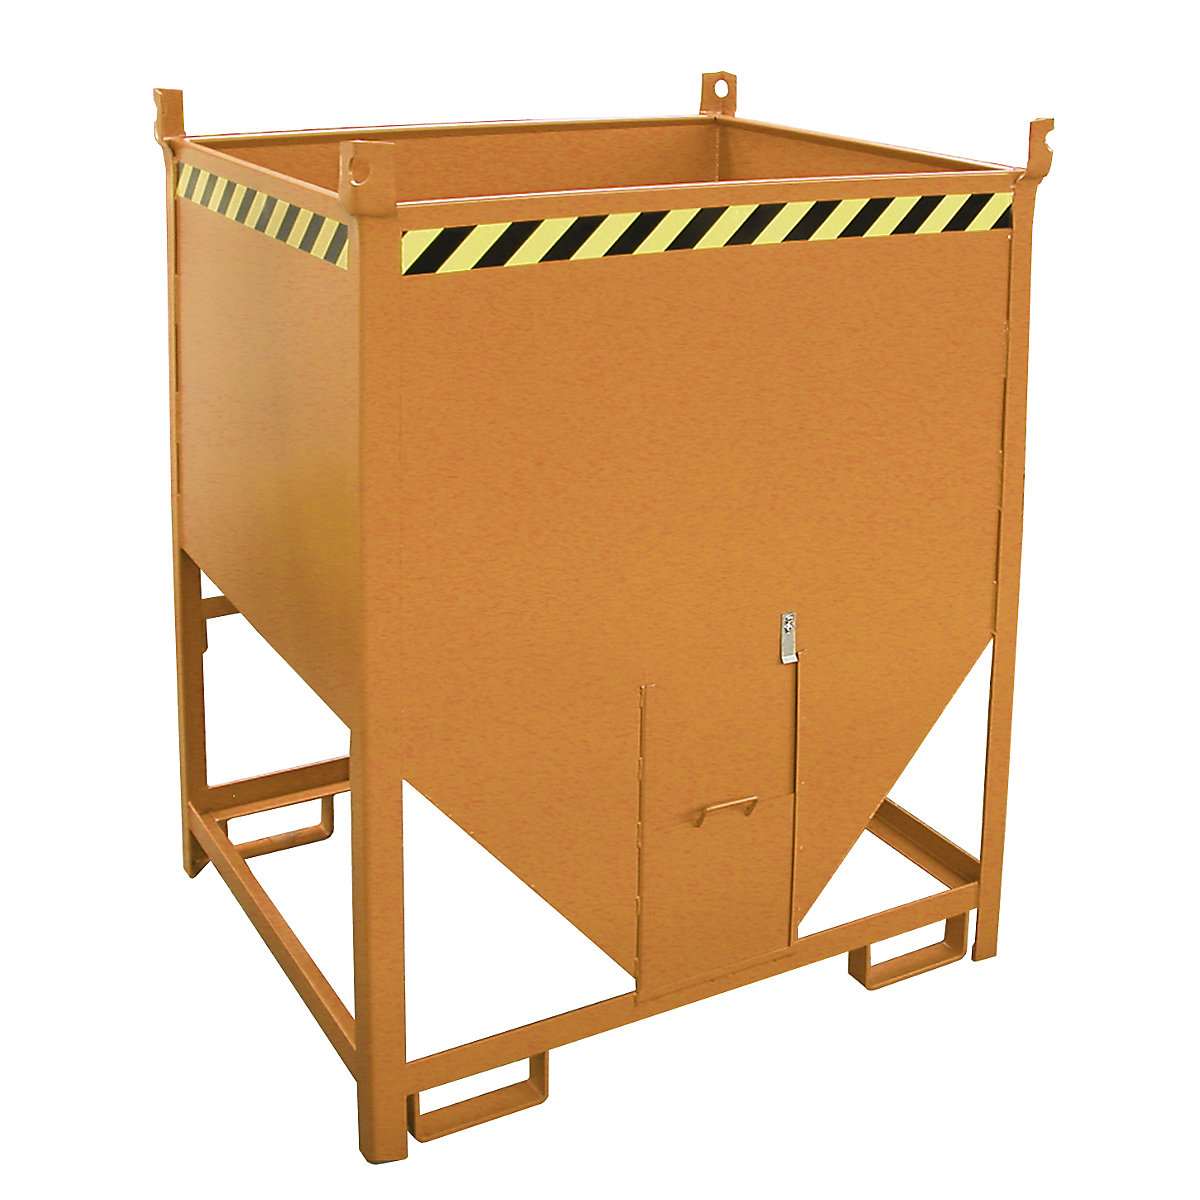 Silo container – eurokraft pro, capacity 1 m³, sliding trap on front side, yellow orange RAL 2000-6